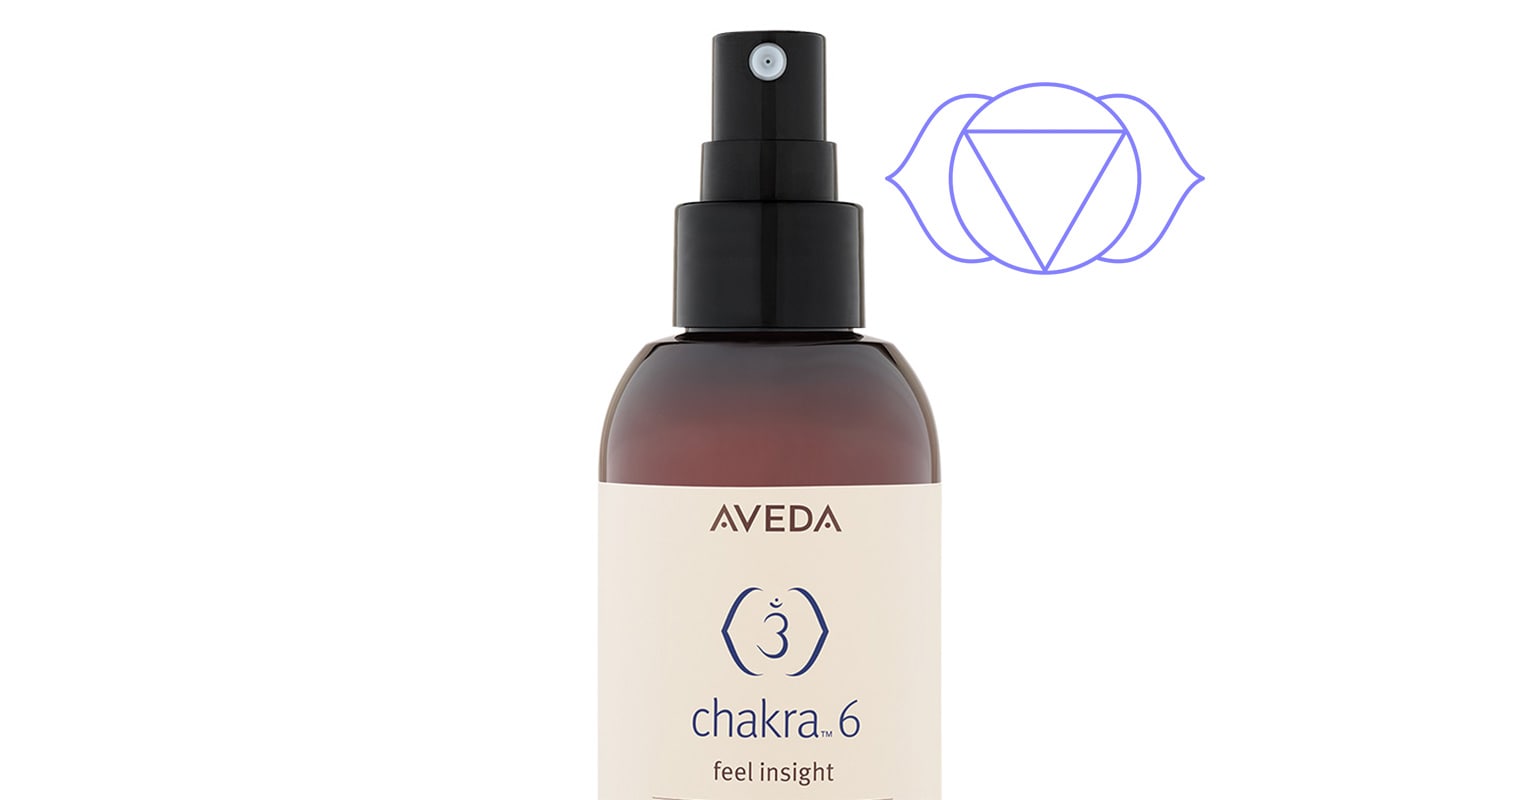 Learn more about Chakra 6 - the feel insight chakra